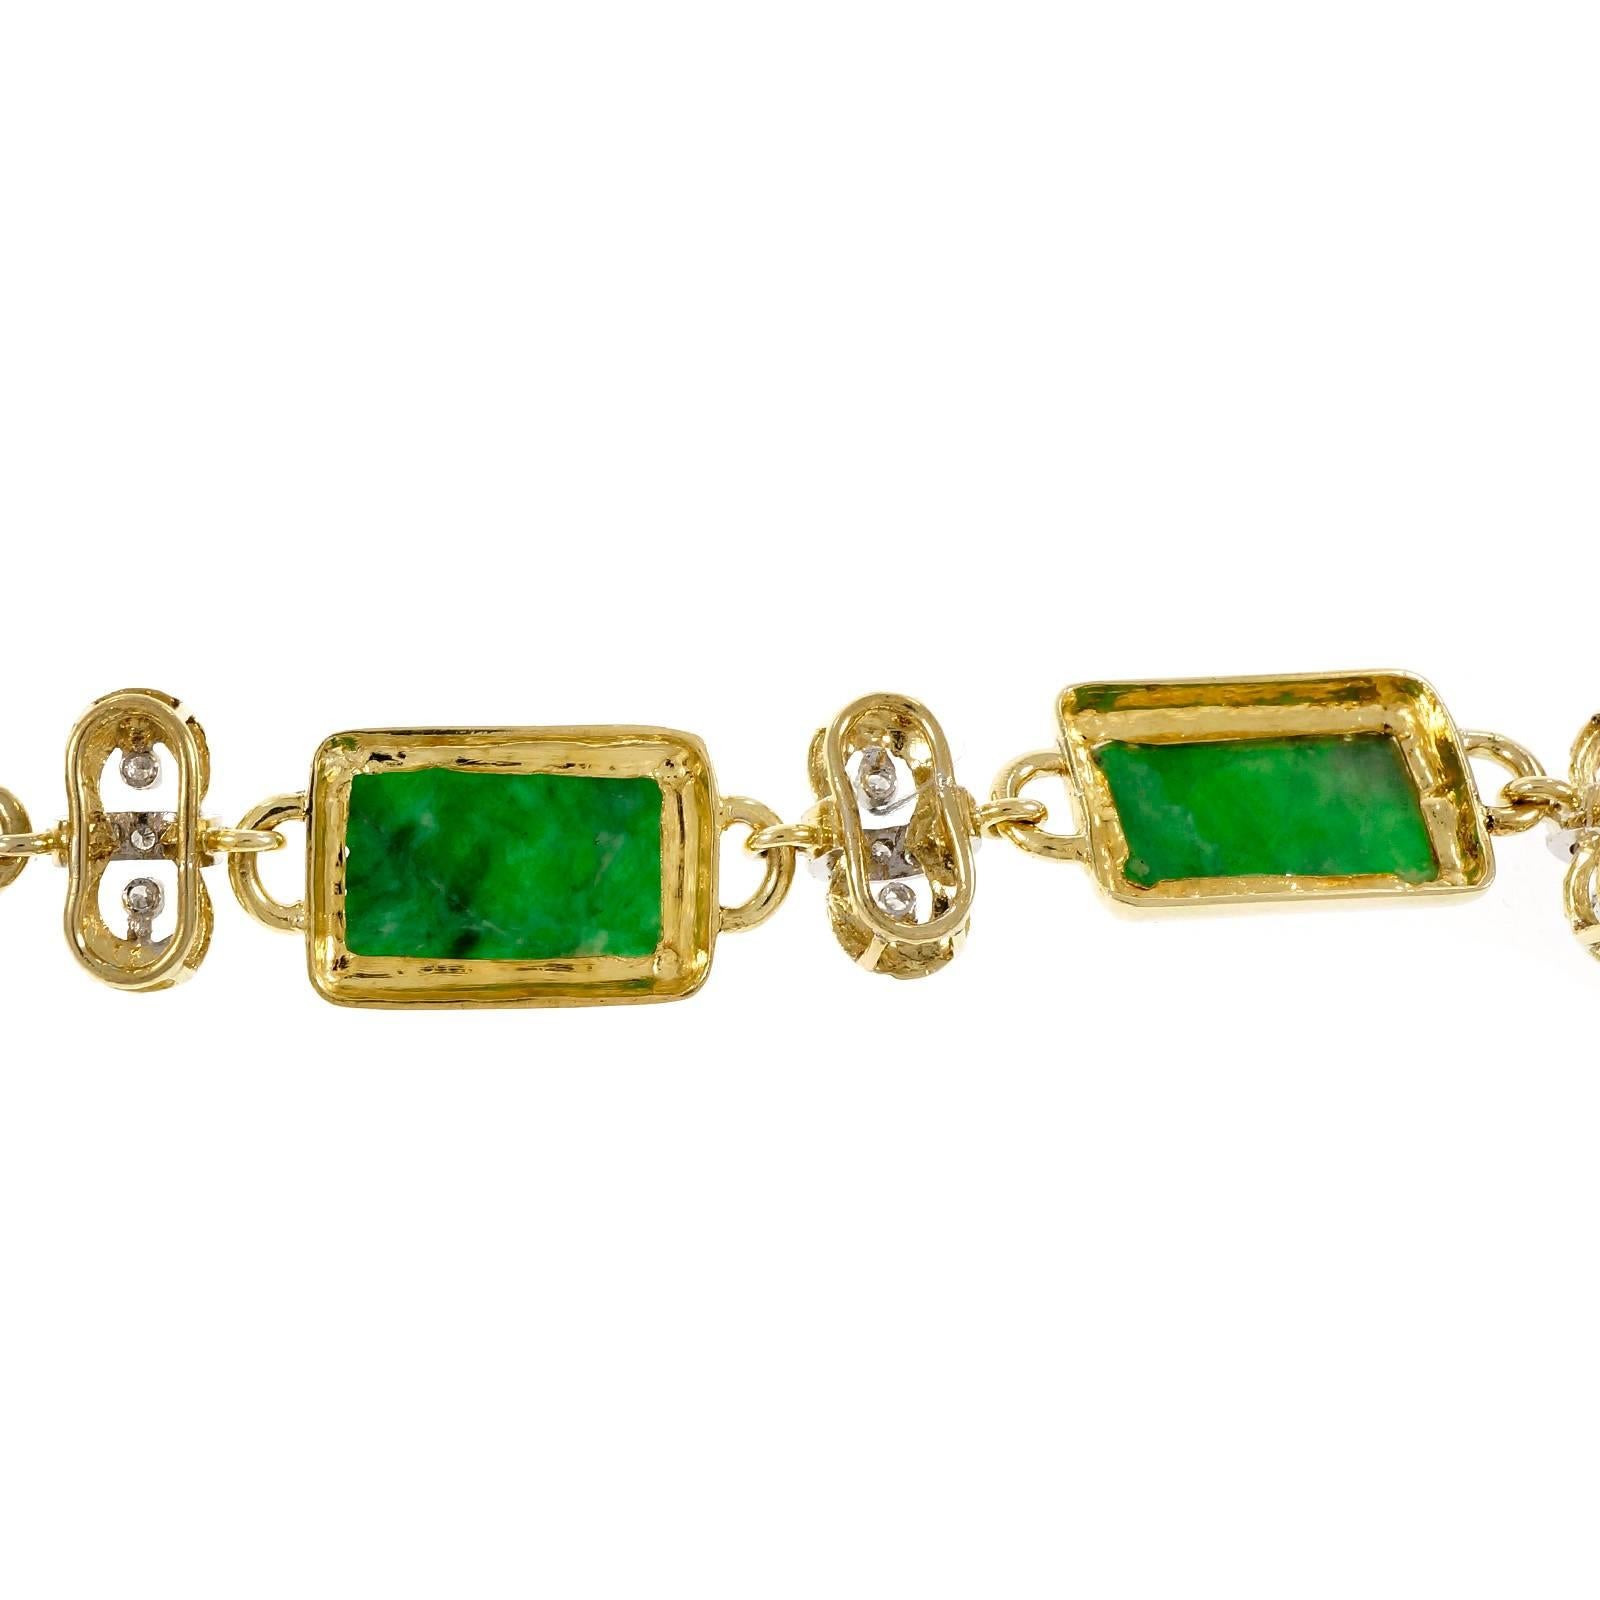 Natural GIA certified untreated Jadeite Jade translucent green 18k yellow and white gold bracelet circa 1950. Hidden built in catch with underside safety.

4 pierced carved green Jadeite Jade, 23.82 x 11.07mm, GIA certificate #2181005578
28 round